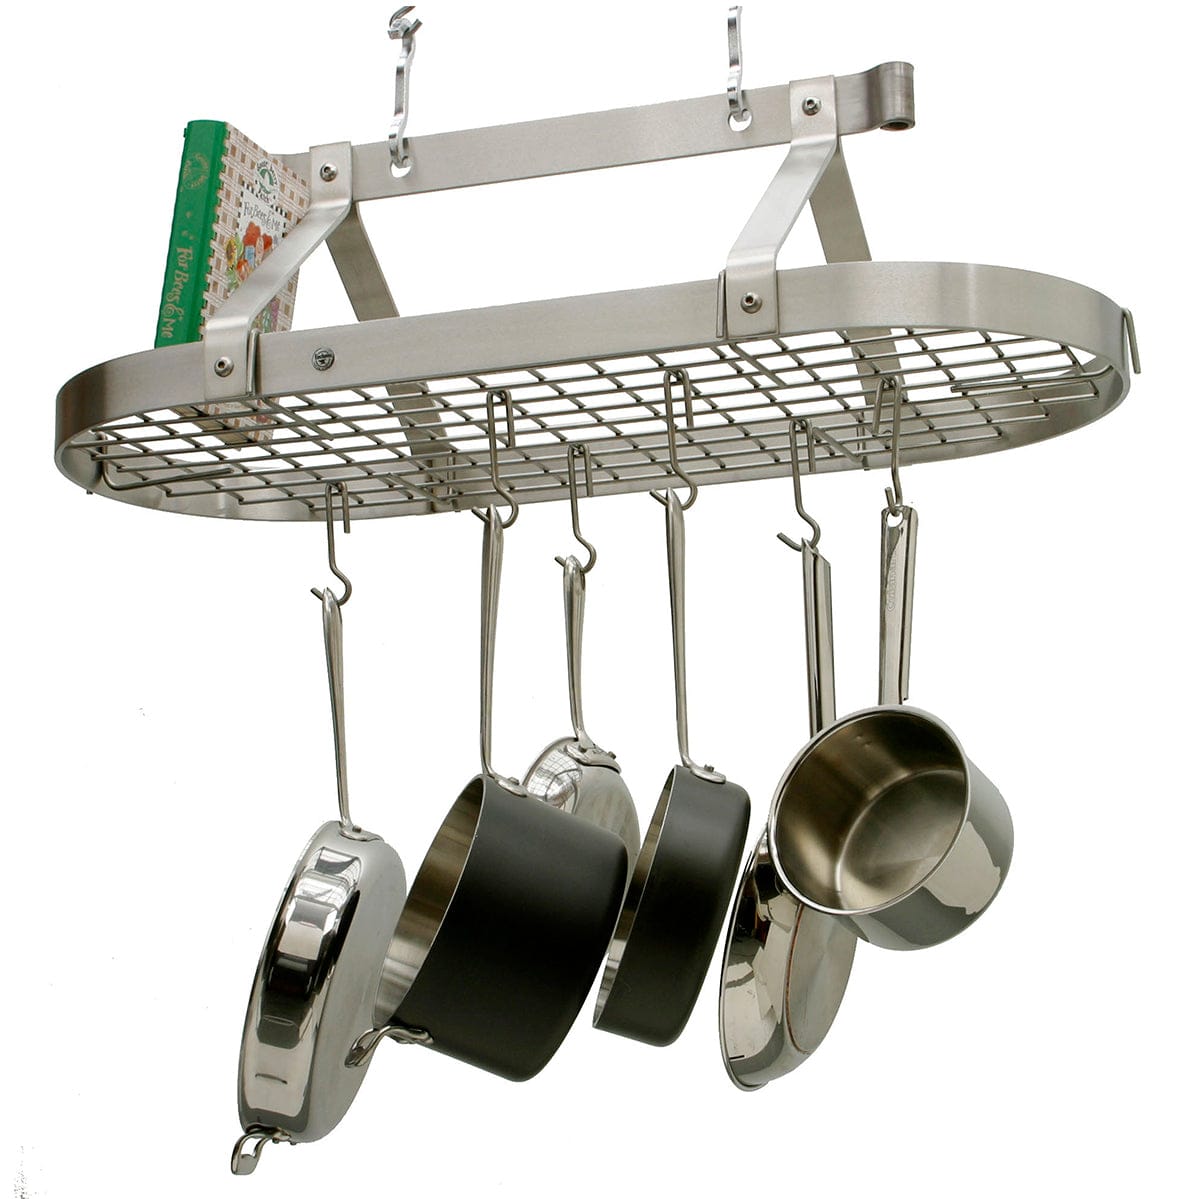 Pot and Pan Rack Organizer Ceiling Mounted Single Wooden Cookware Hanger